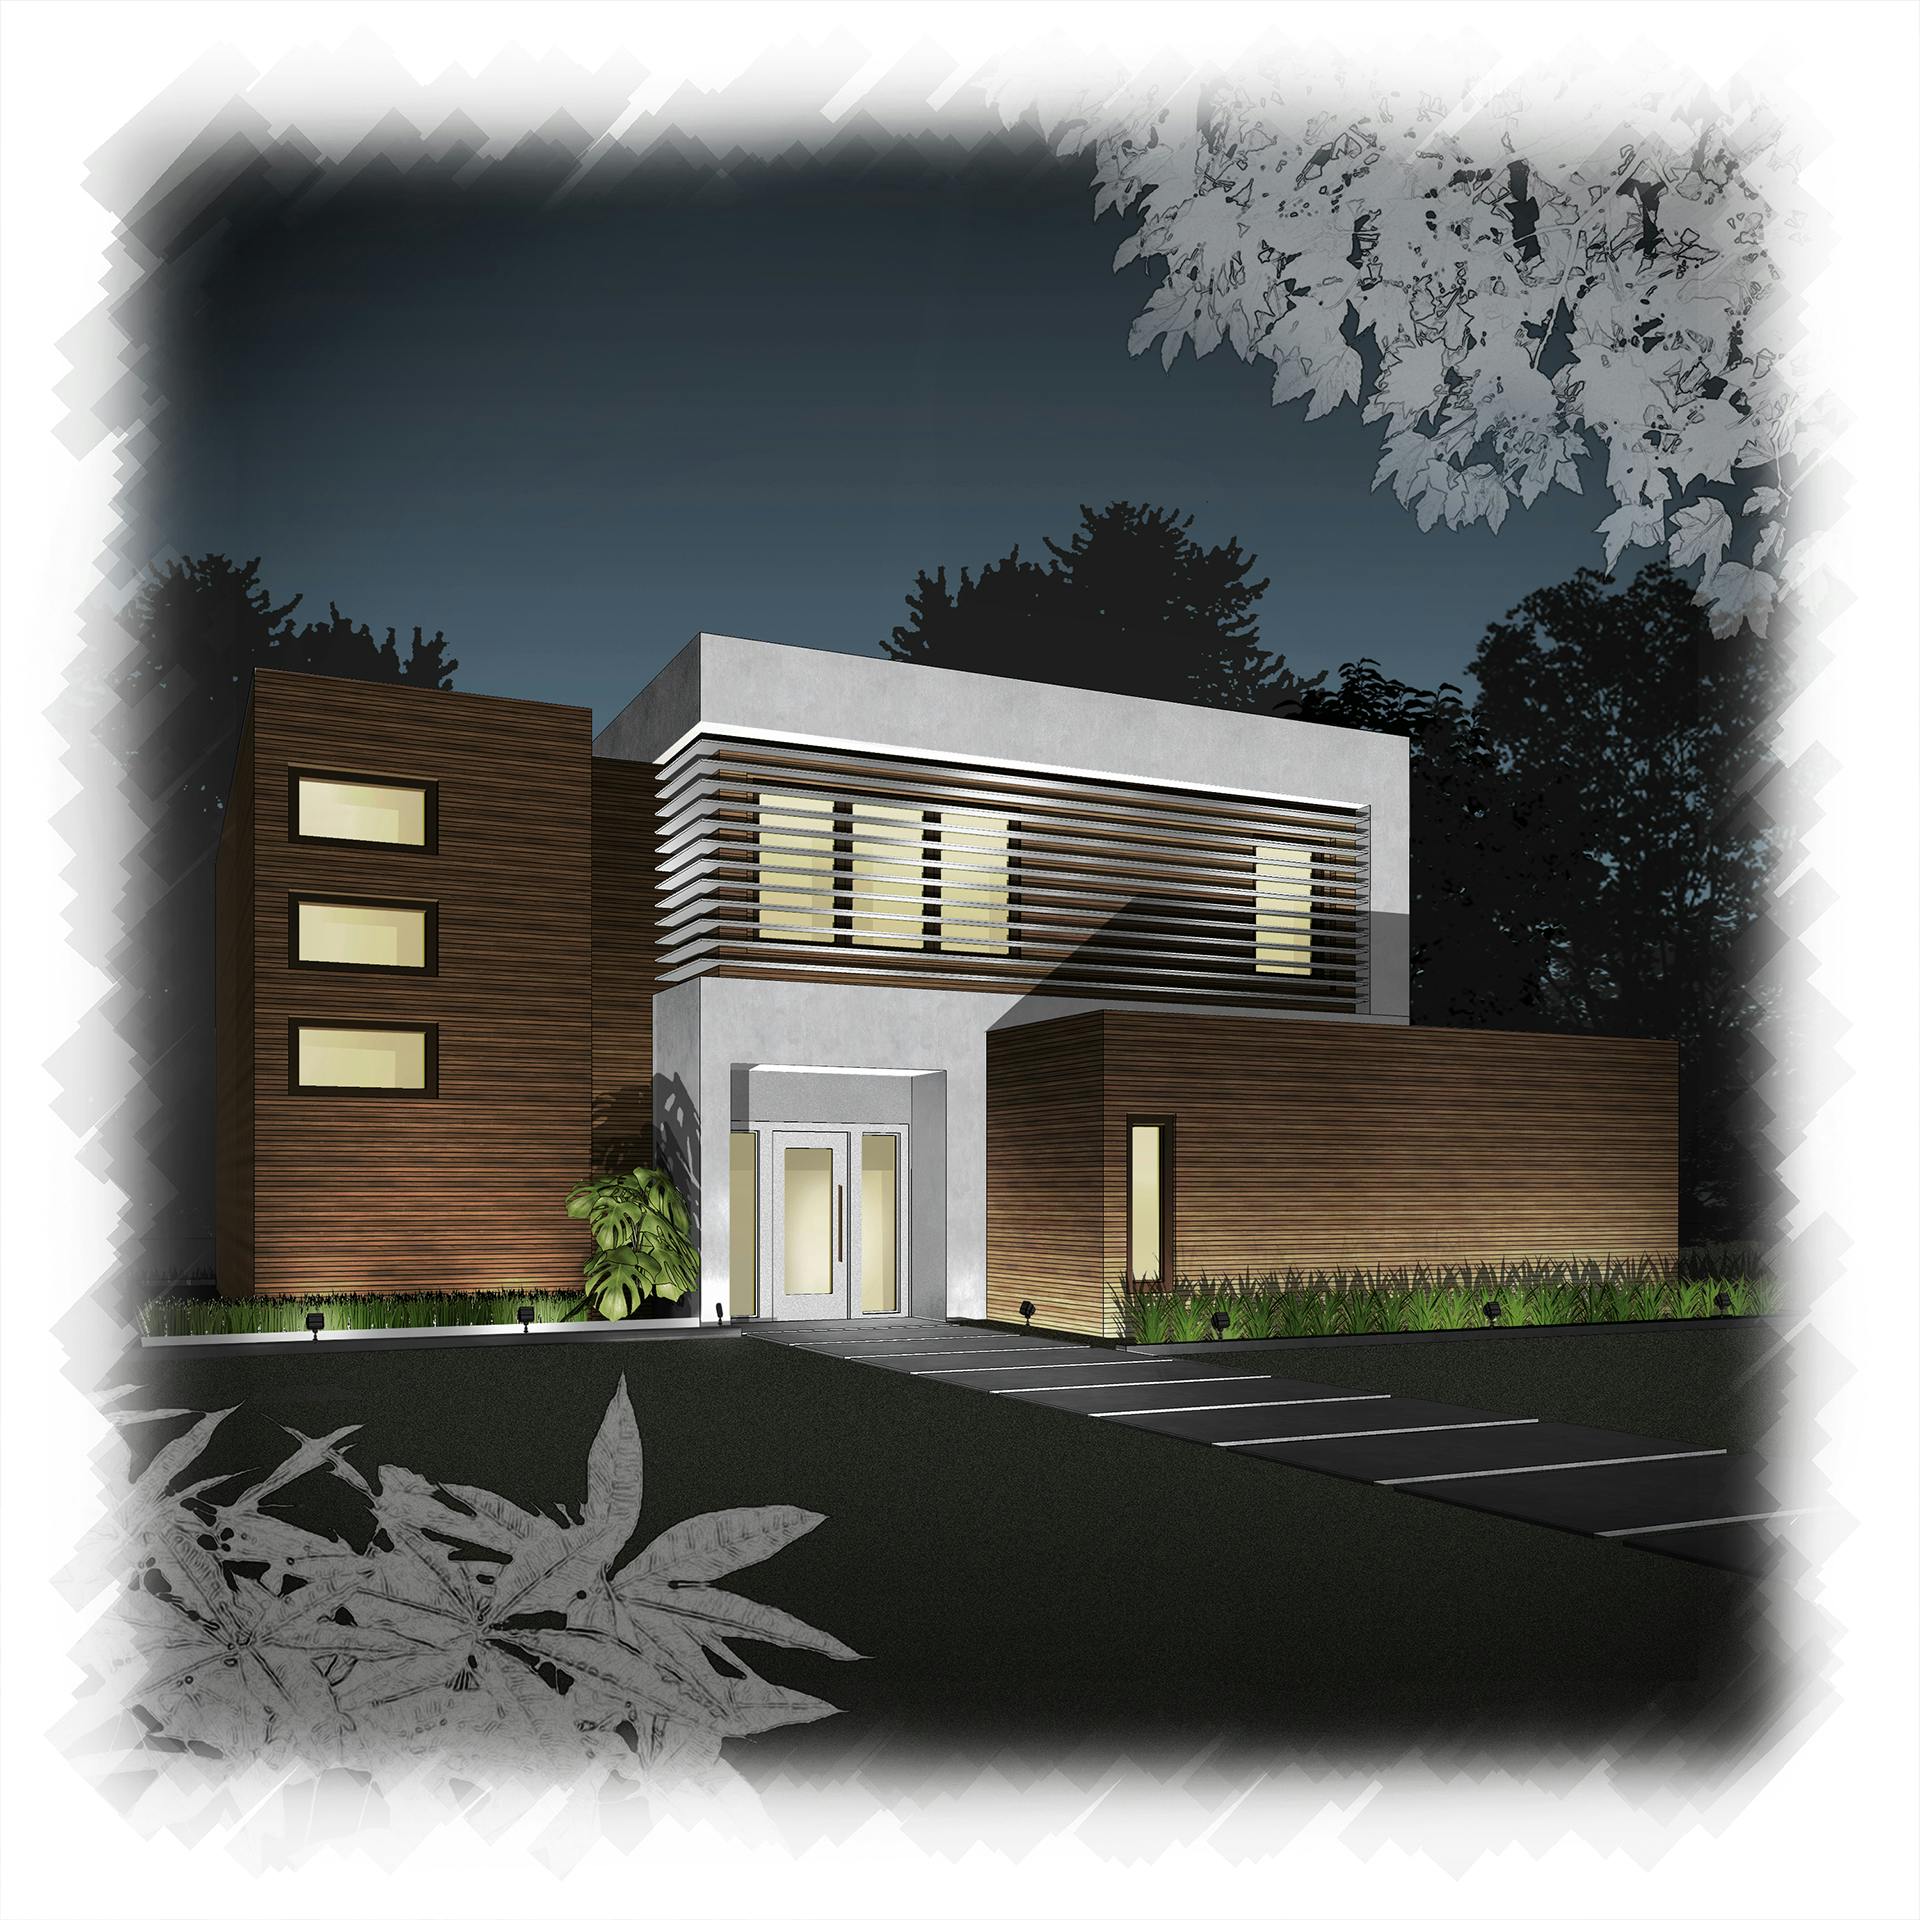 Illustration of a modern home exterior at night with up lighting